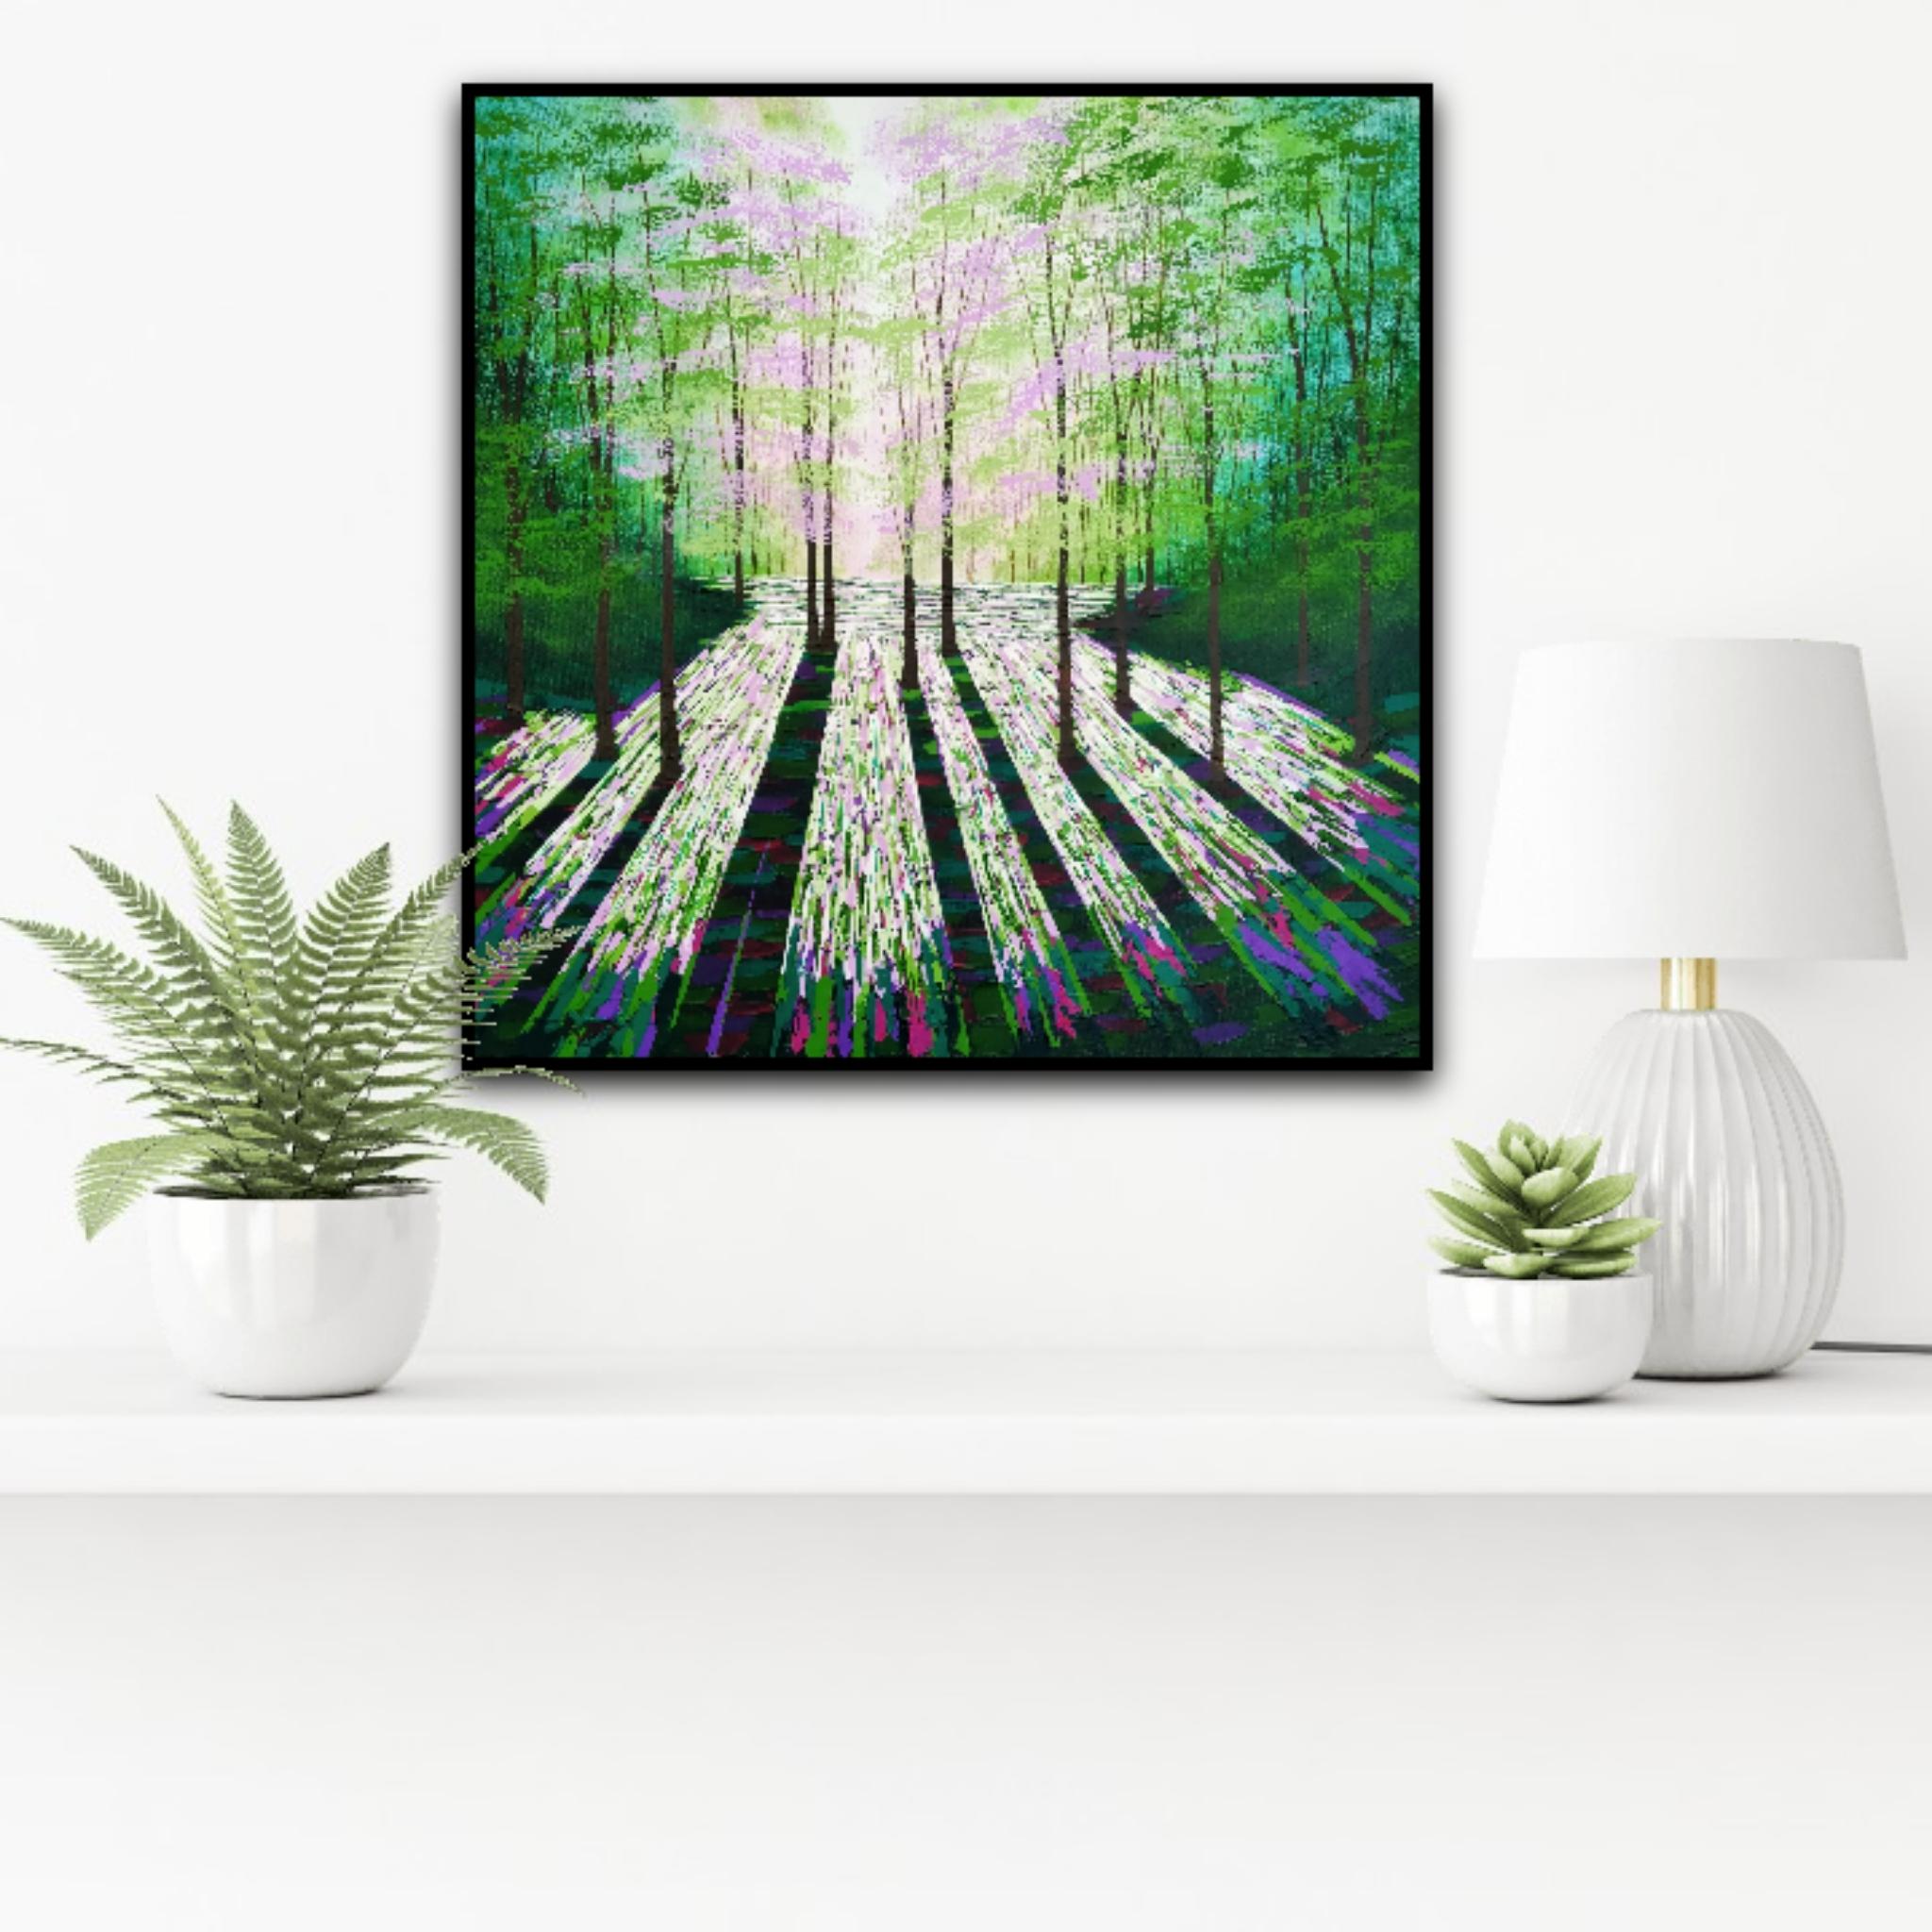 The Forest Talks [2022]

original
Acrylics on canvas
Image size: H:70 cm x W:70 cm
Complete Size of Unframed Work: H:70 cm x W:70 cm x D:3.5cm
Sold Unframed
Please note that insitu images are purely an indication of how a piece may look

Amanda